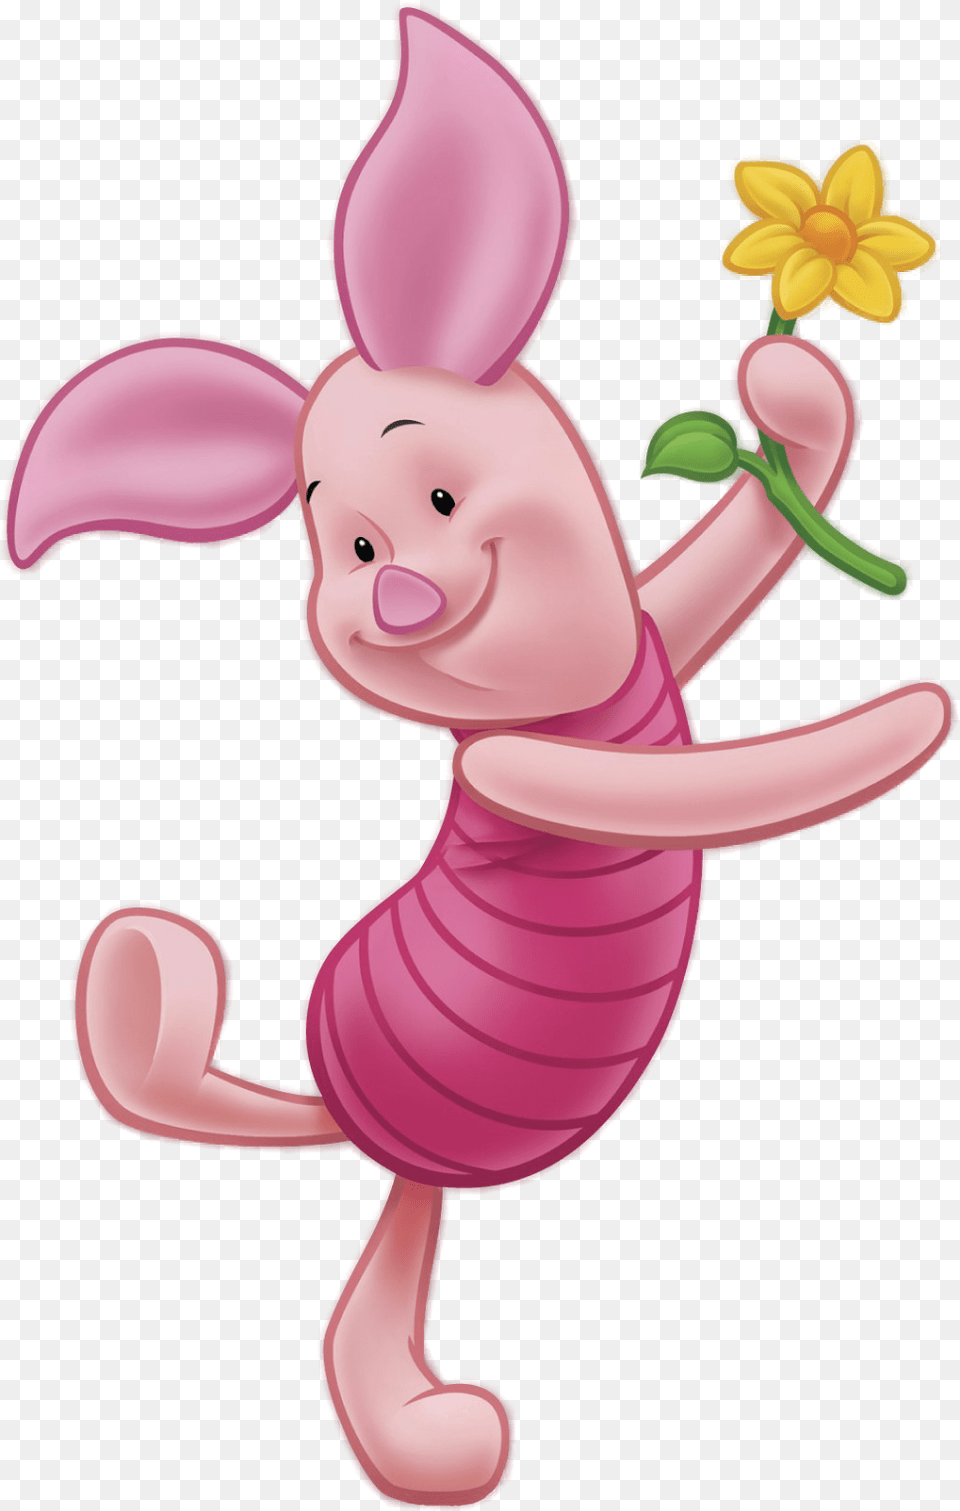 Piglet Winnie The Pooh Piglet Winnie The Pooh, Flower, Plant, Toy, Cartoon Png Image